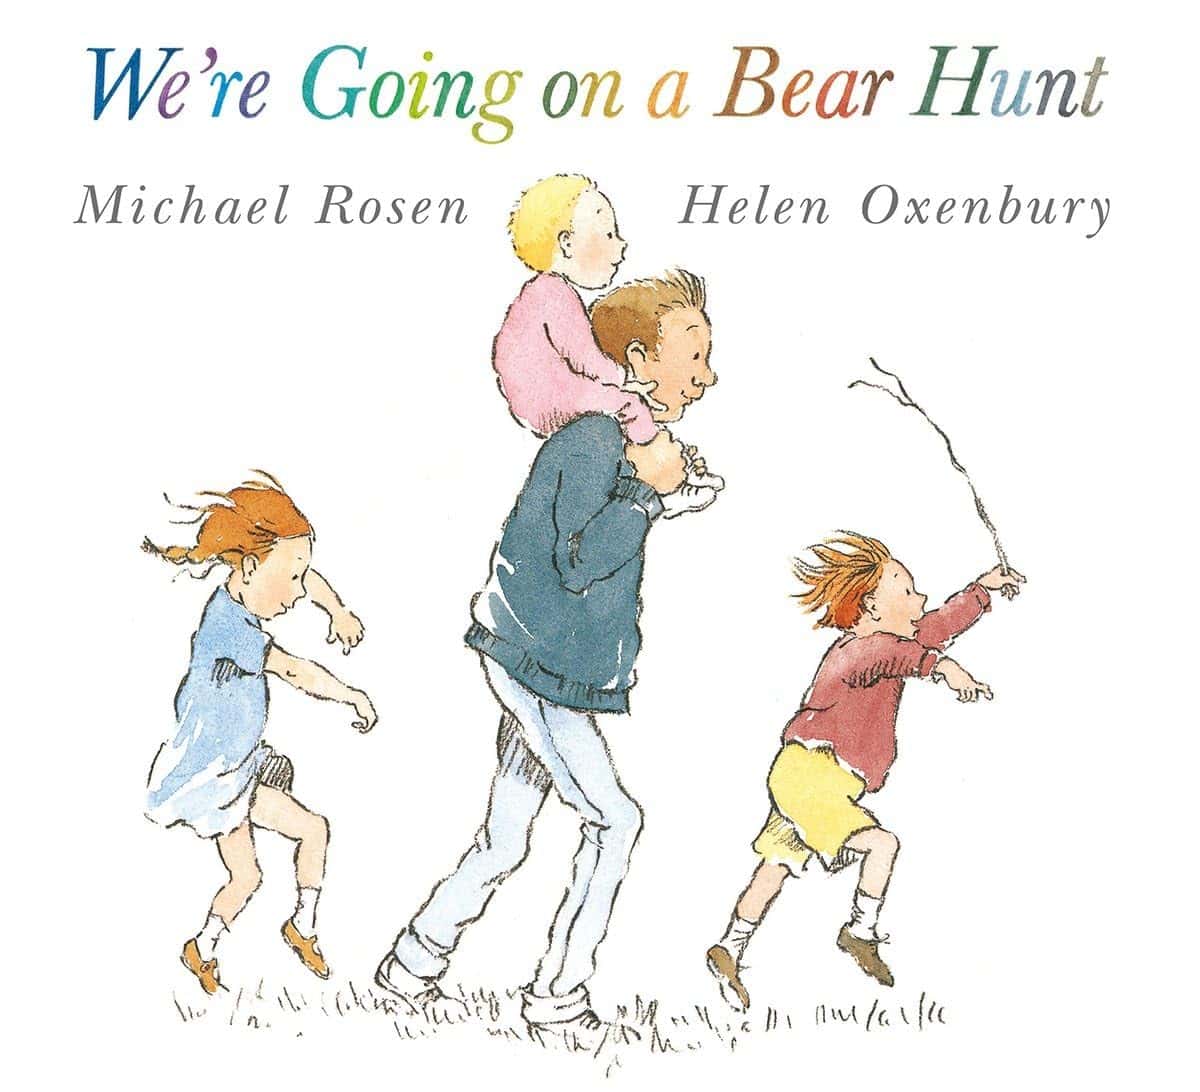 We're Going On A Bear Hunt by Michael Rosen and Helen Oxenbury